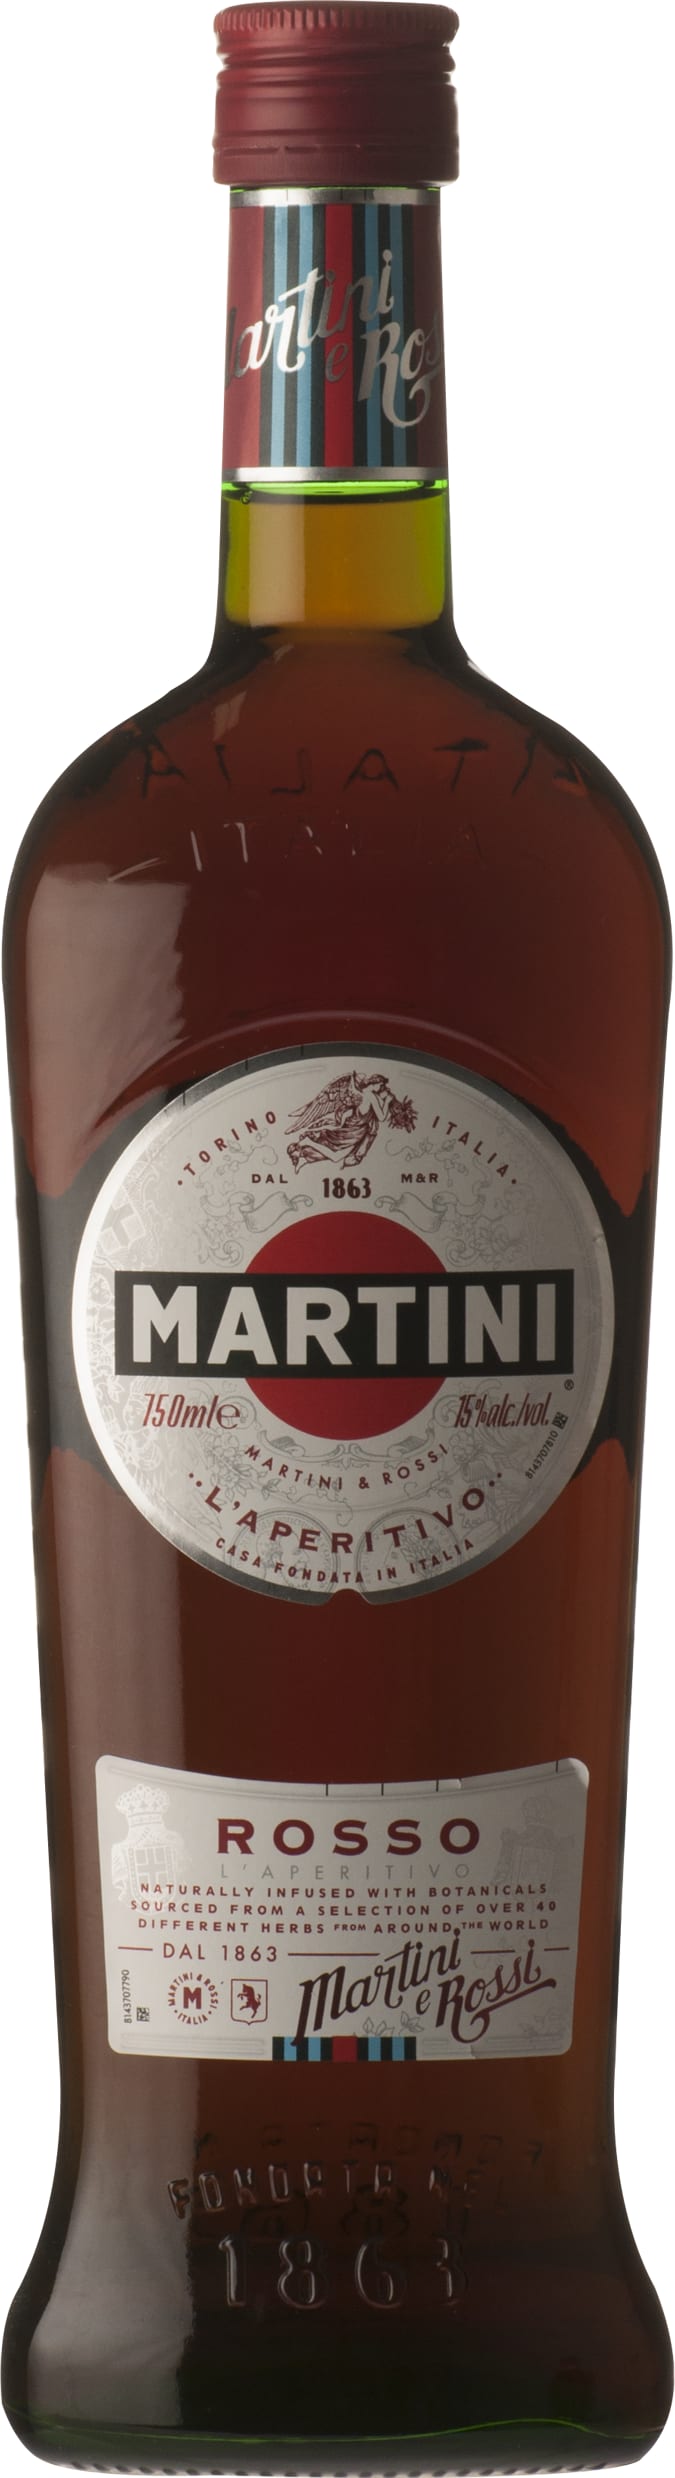 Martini Rosso NV 75cl NV - Buy Martini Wines from GREAT WINES DIRECT wine shop